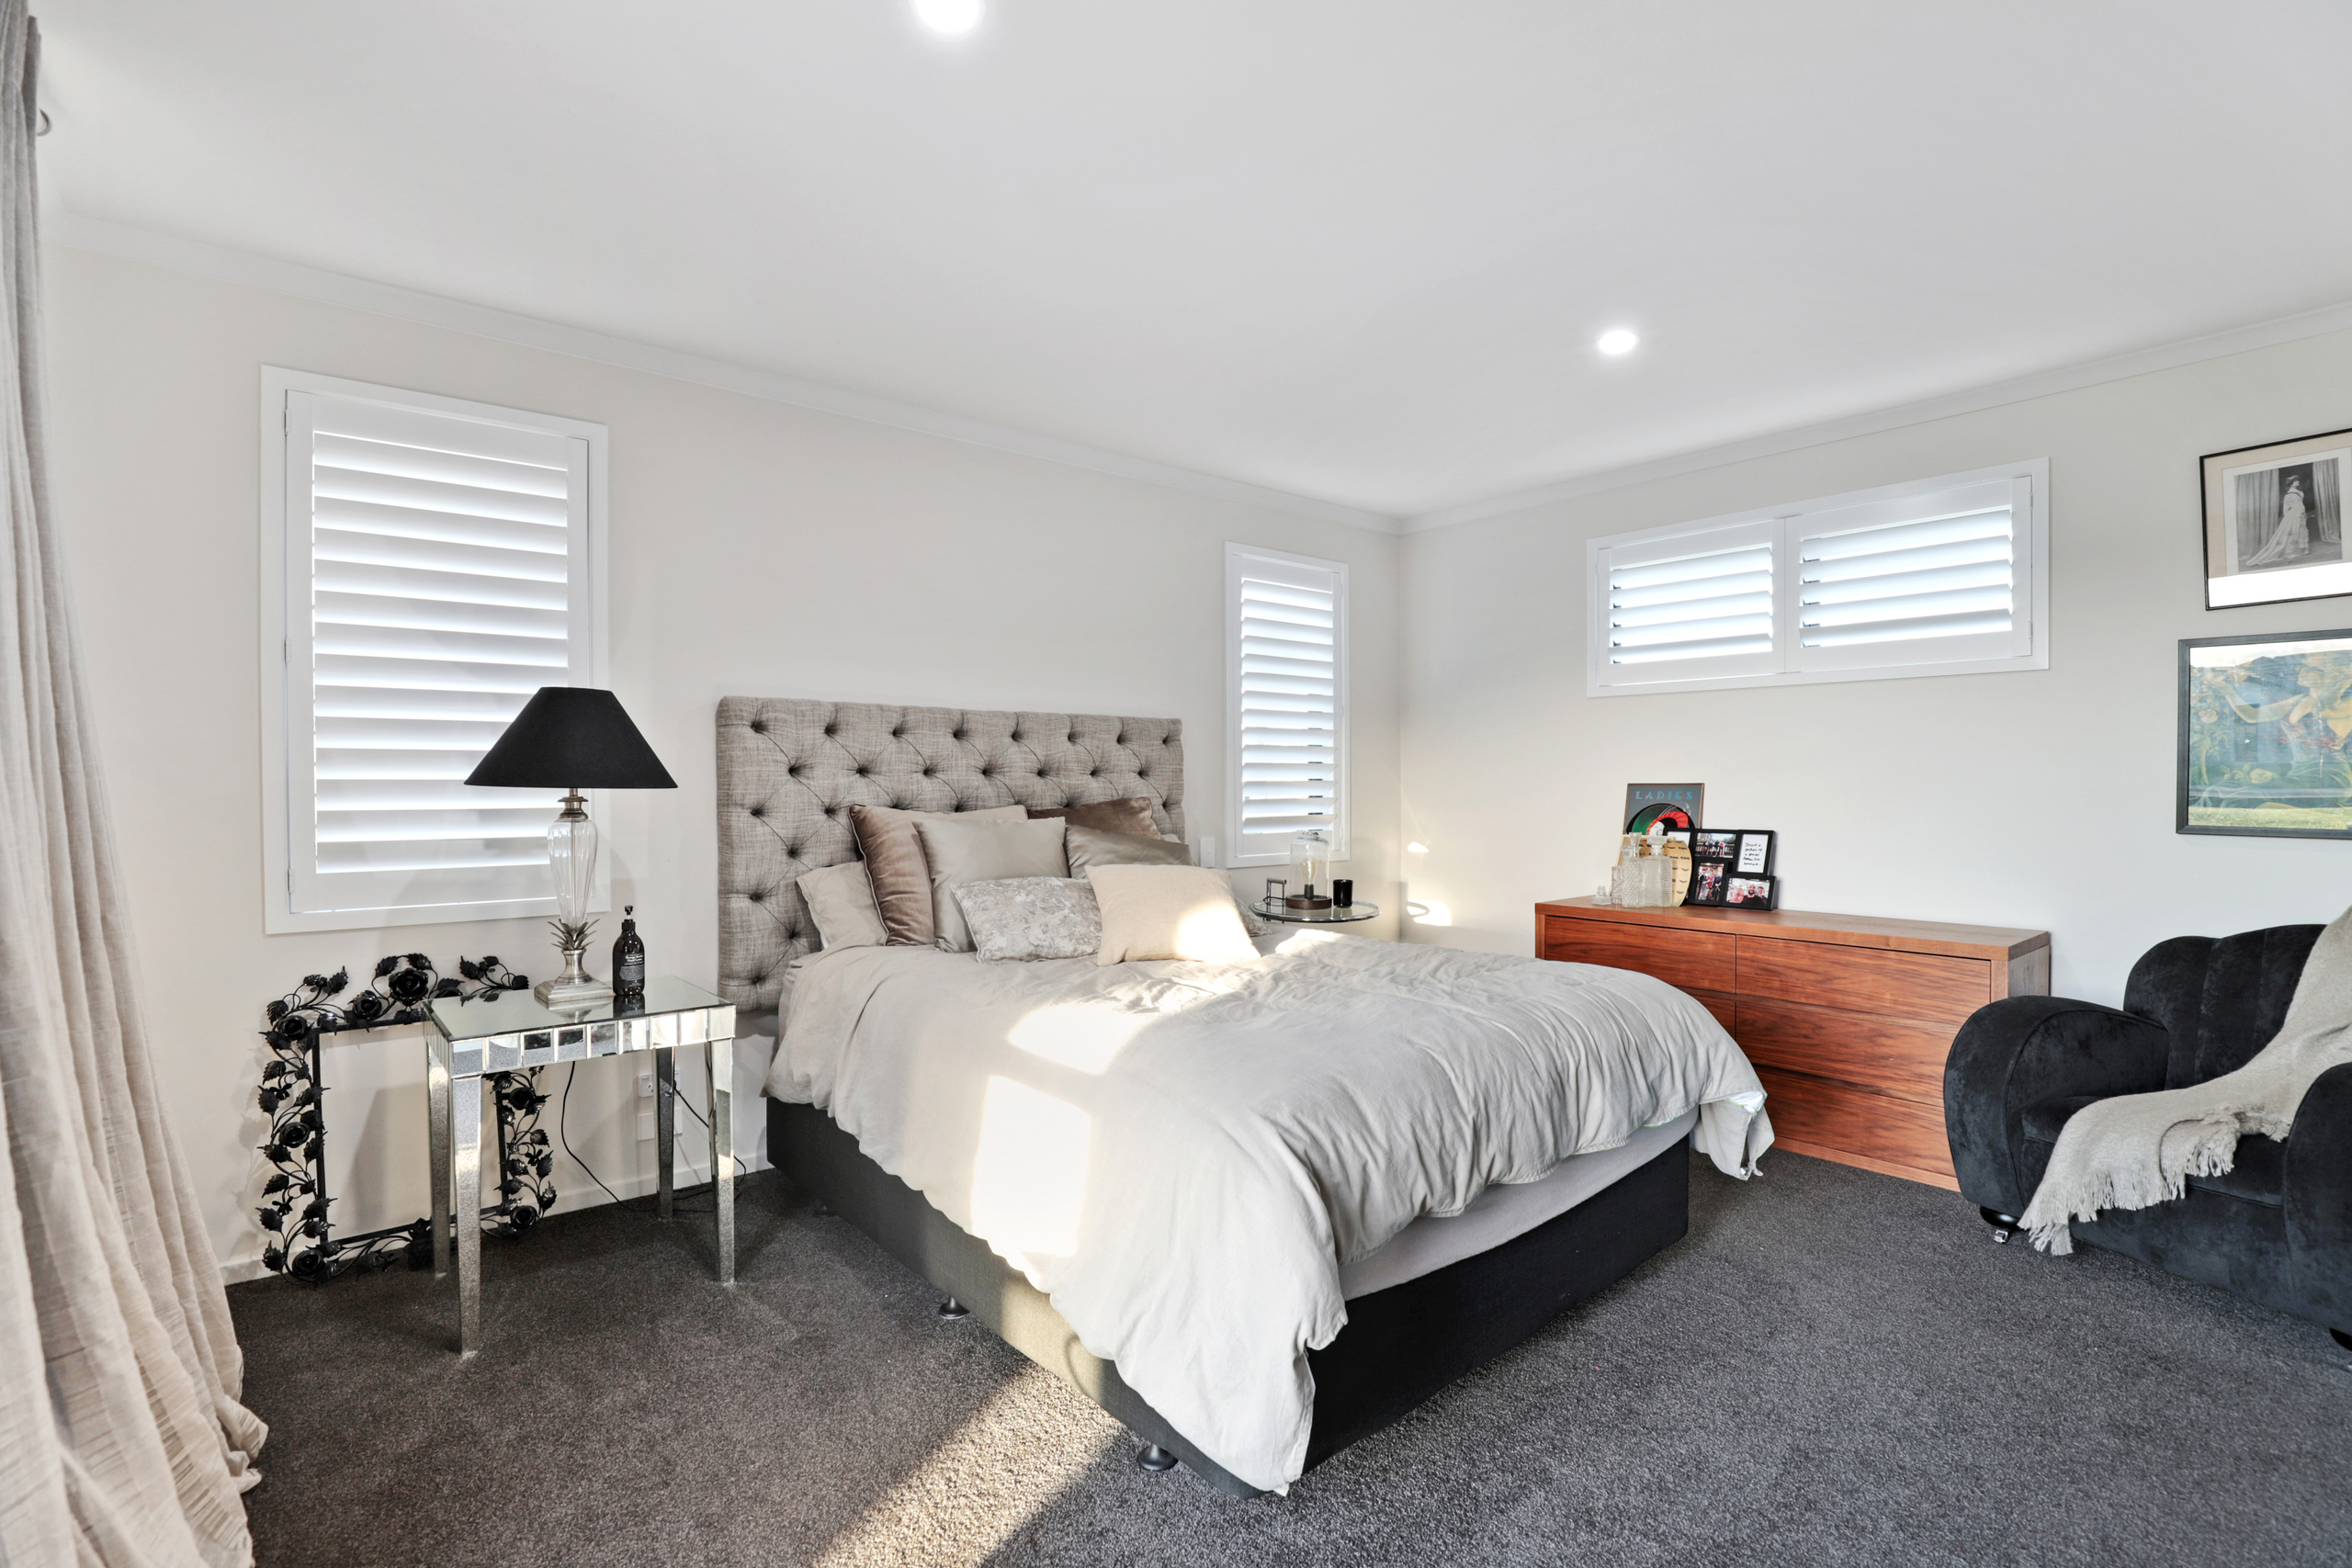 Main bedroom with cream drapes and venetian wooden blinds